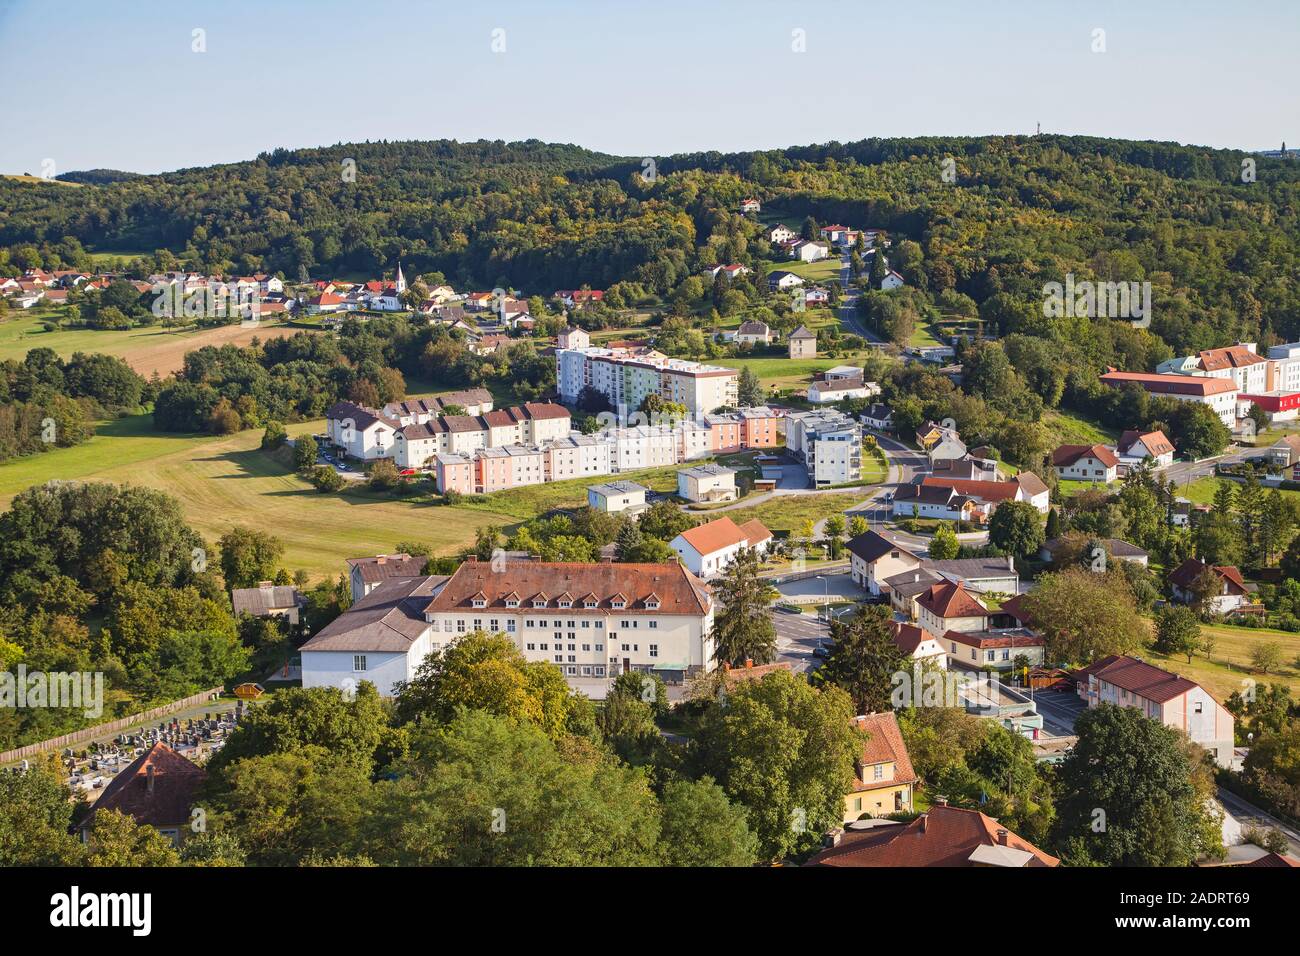 Photo of the small city of Gussing, Austria Stock Photo